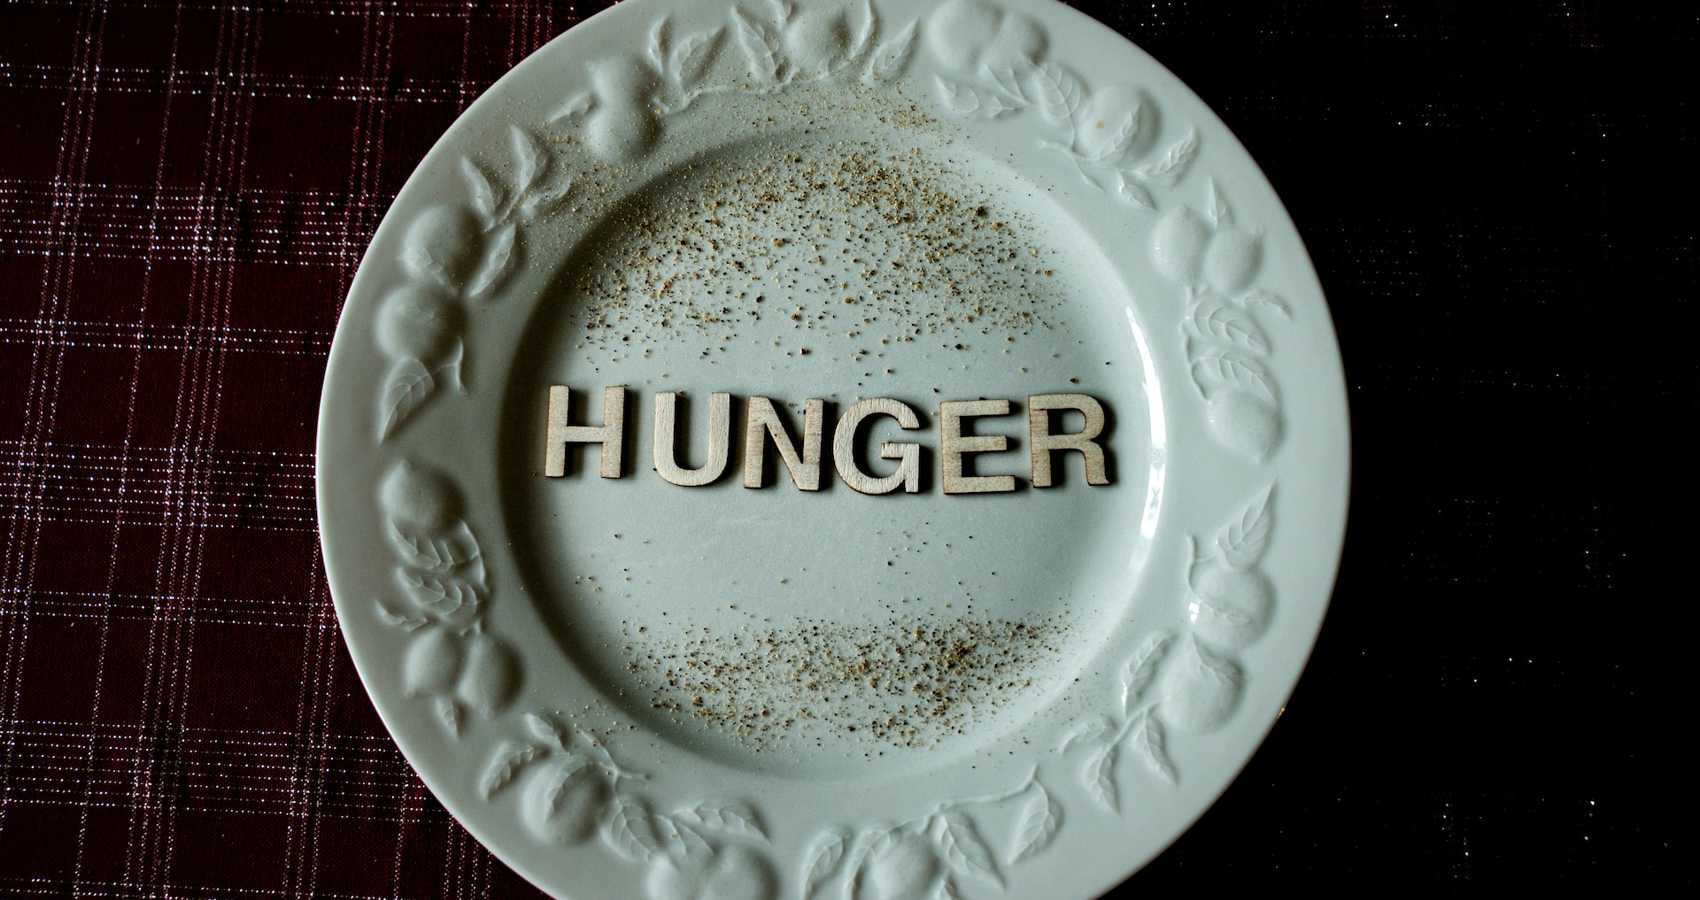 Hunger, story by Kamran Akhtar Siddiqui at Spillwords.com